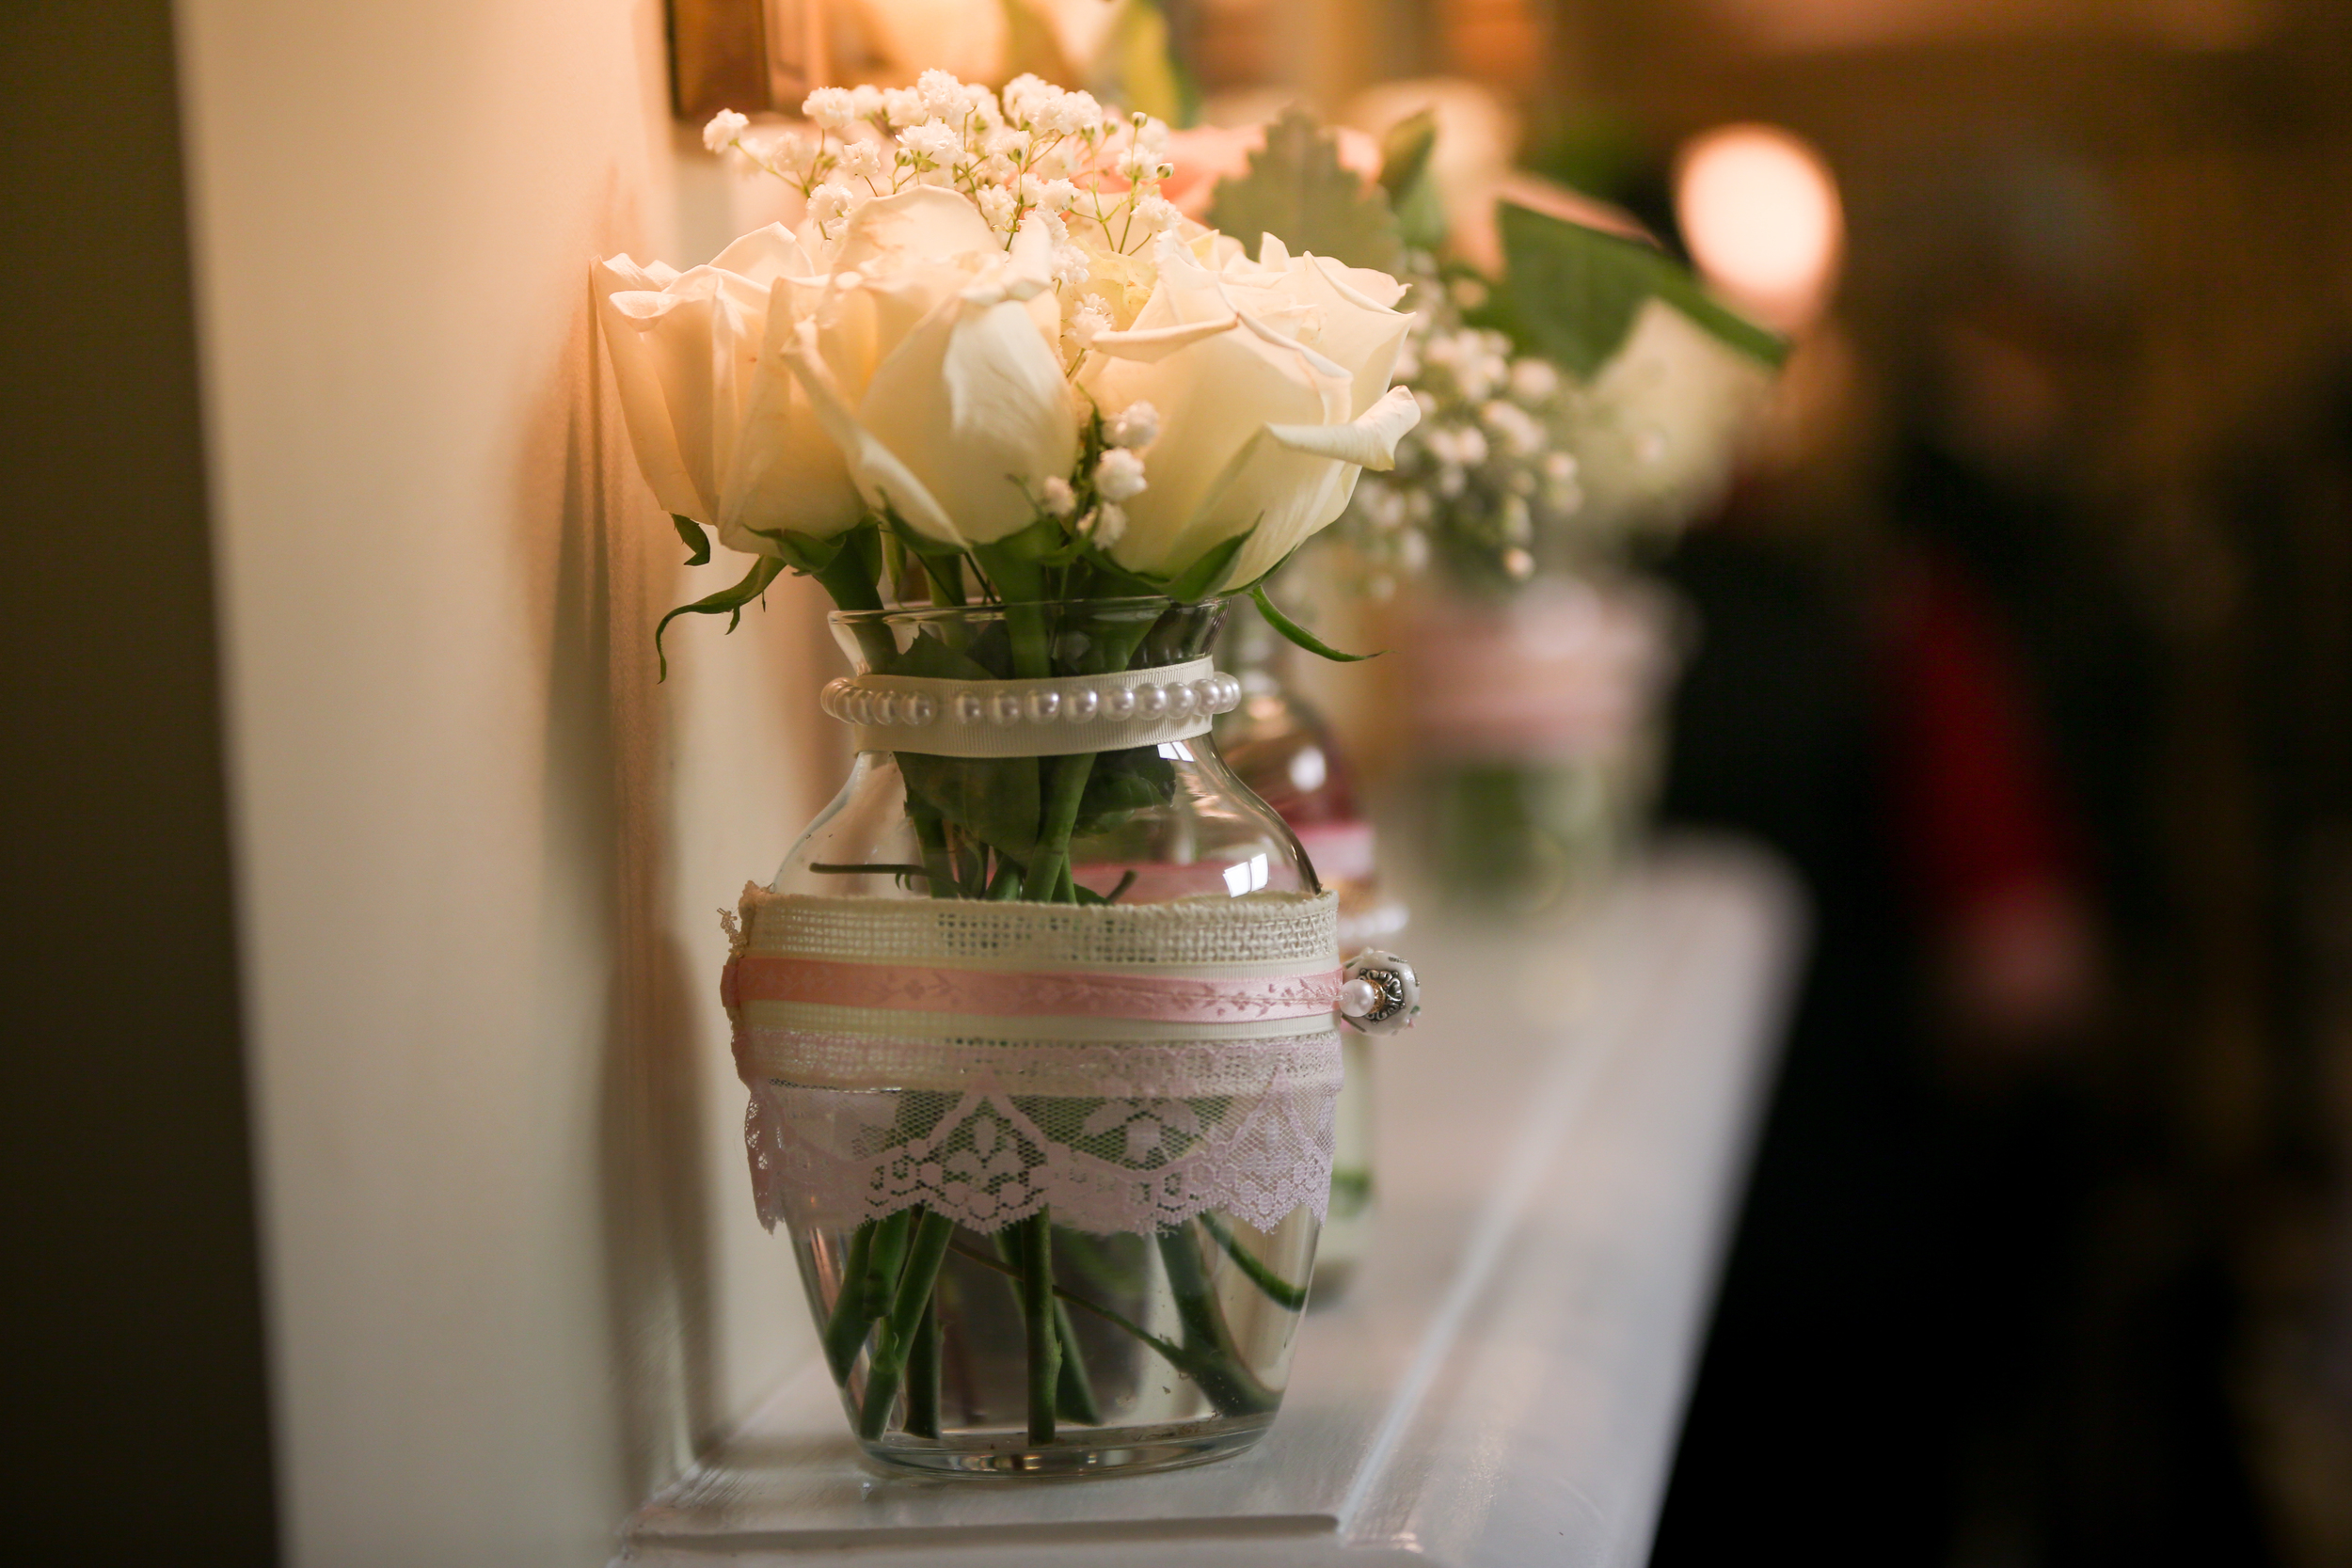 Burlap details at wedding at the Lace House